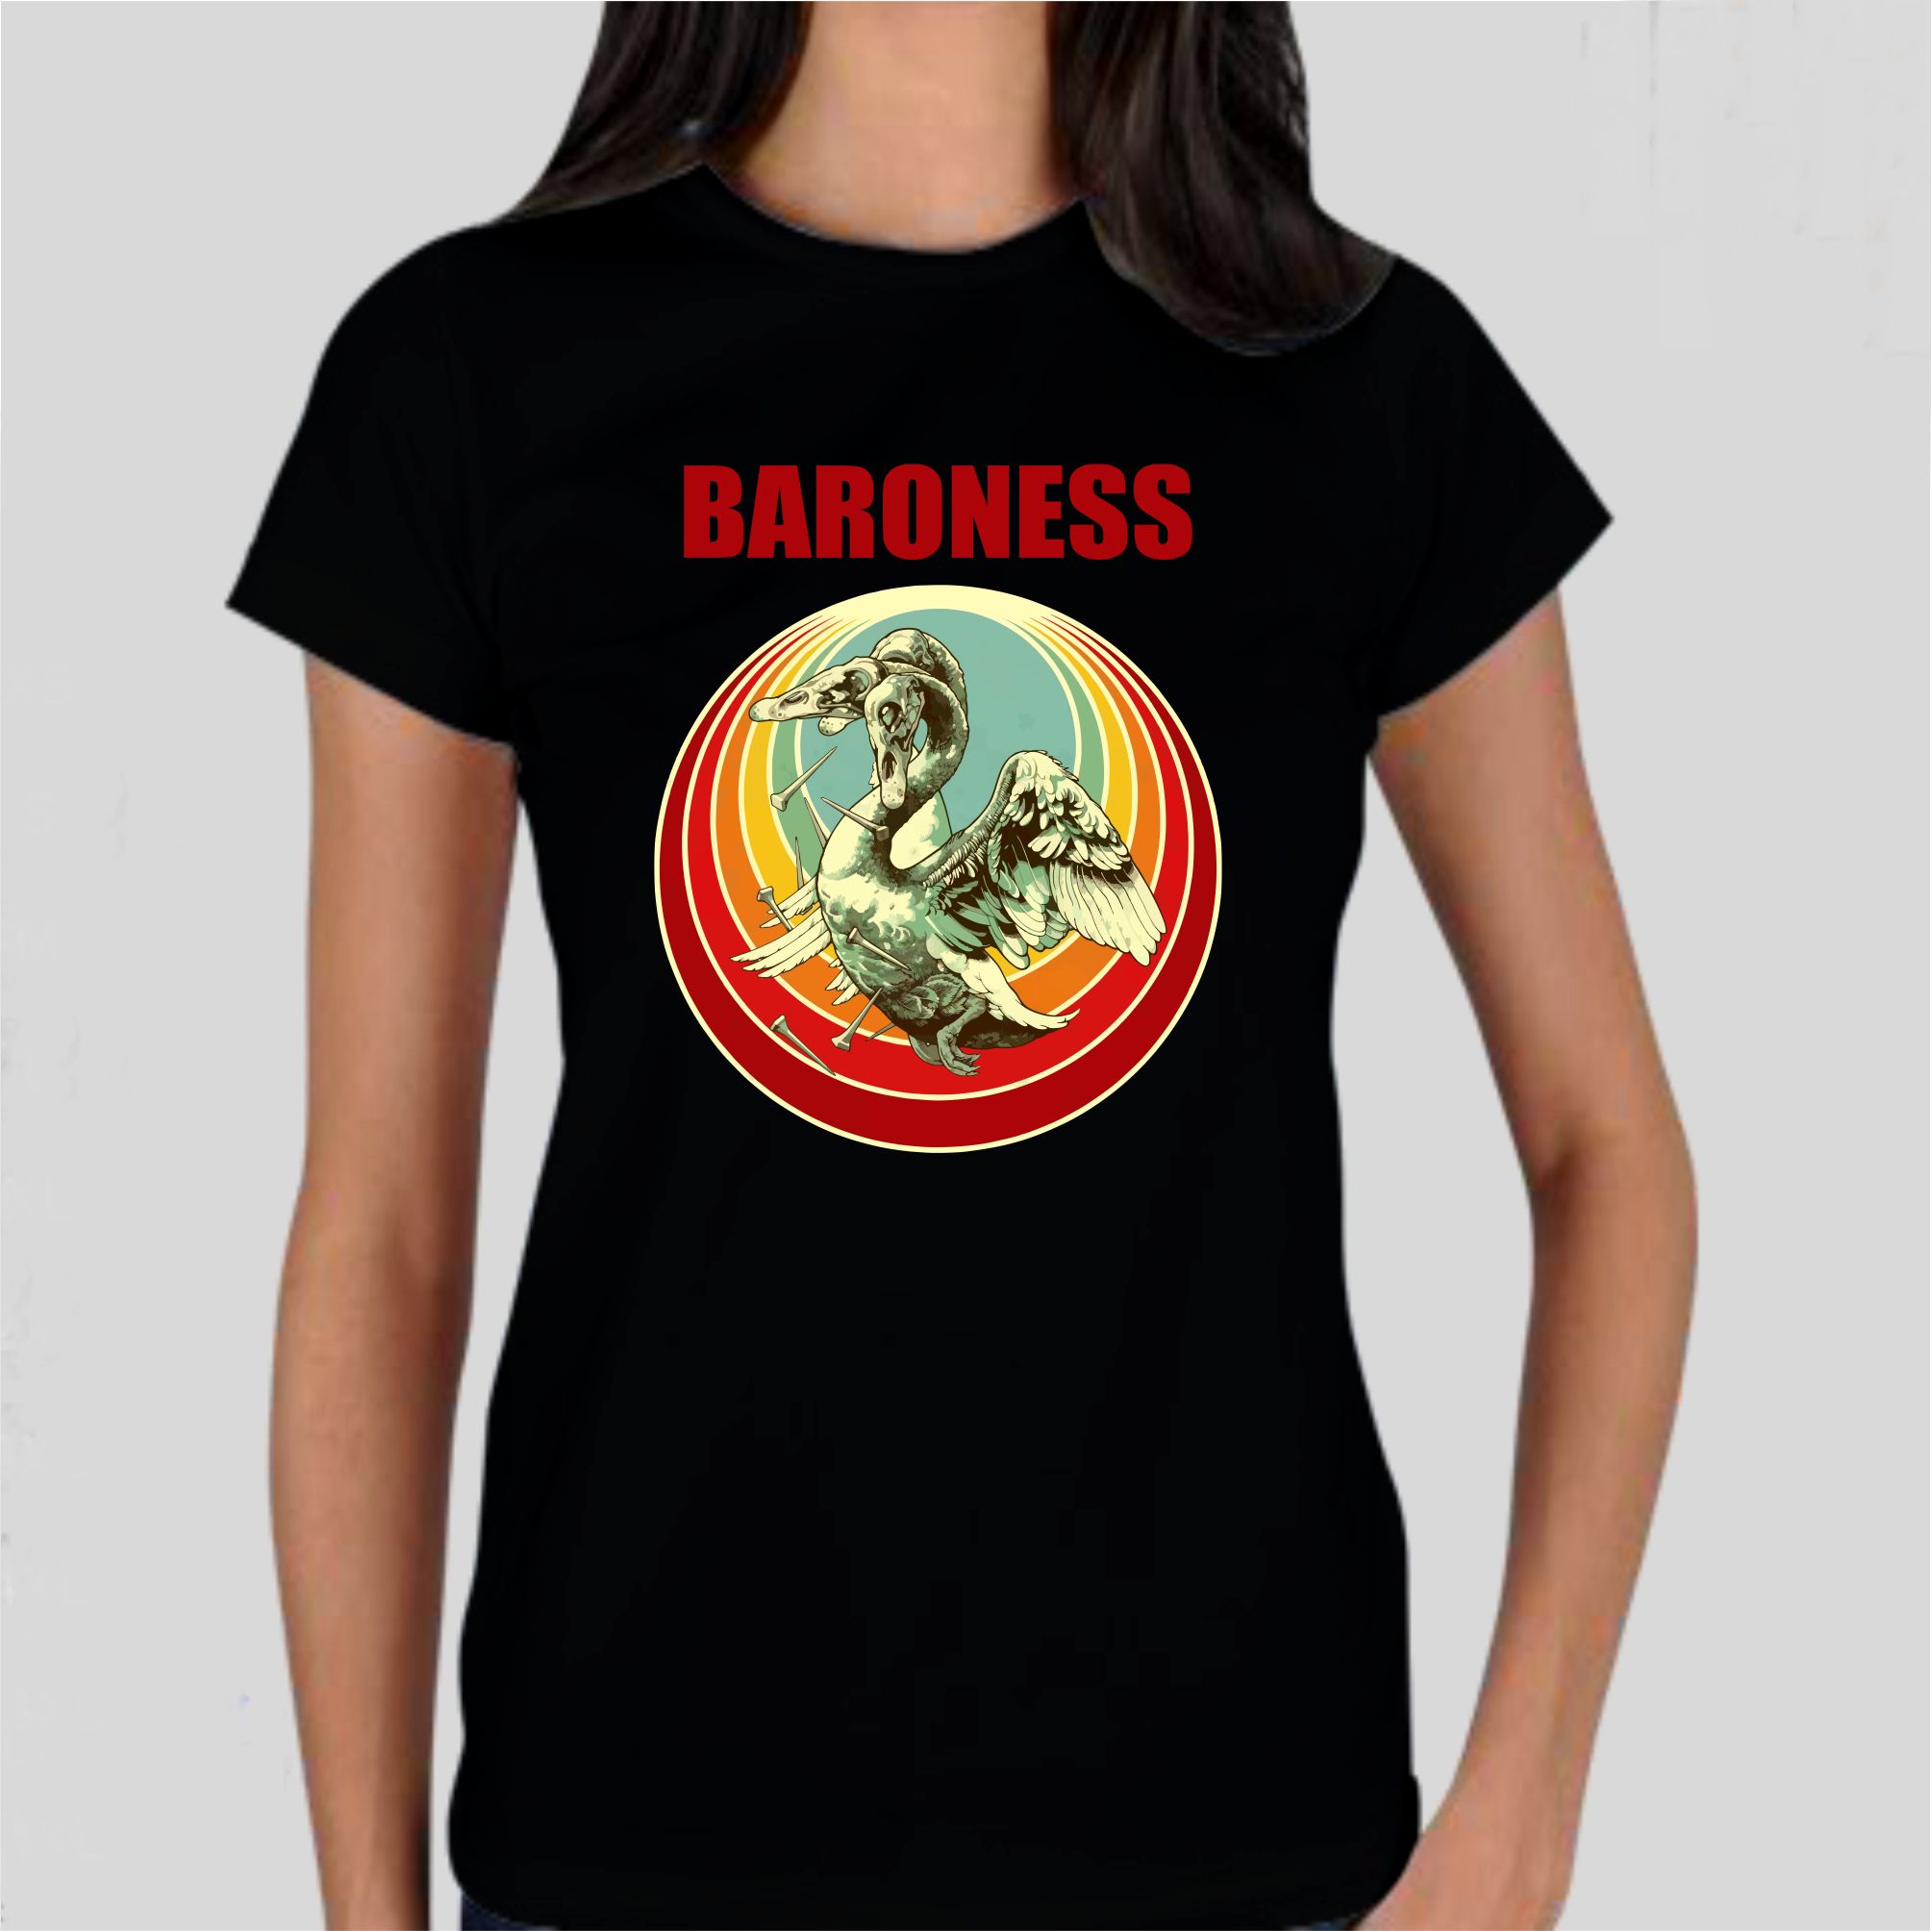 Baroness Girlie TShirt Metal & Rock Tshirts and Accessories